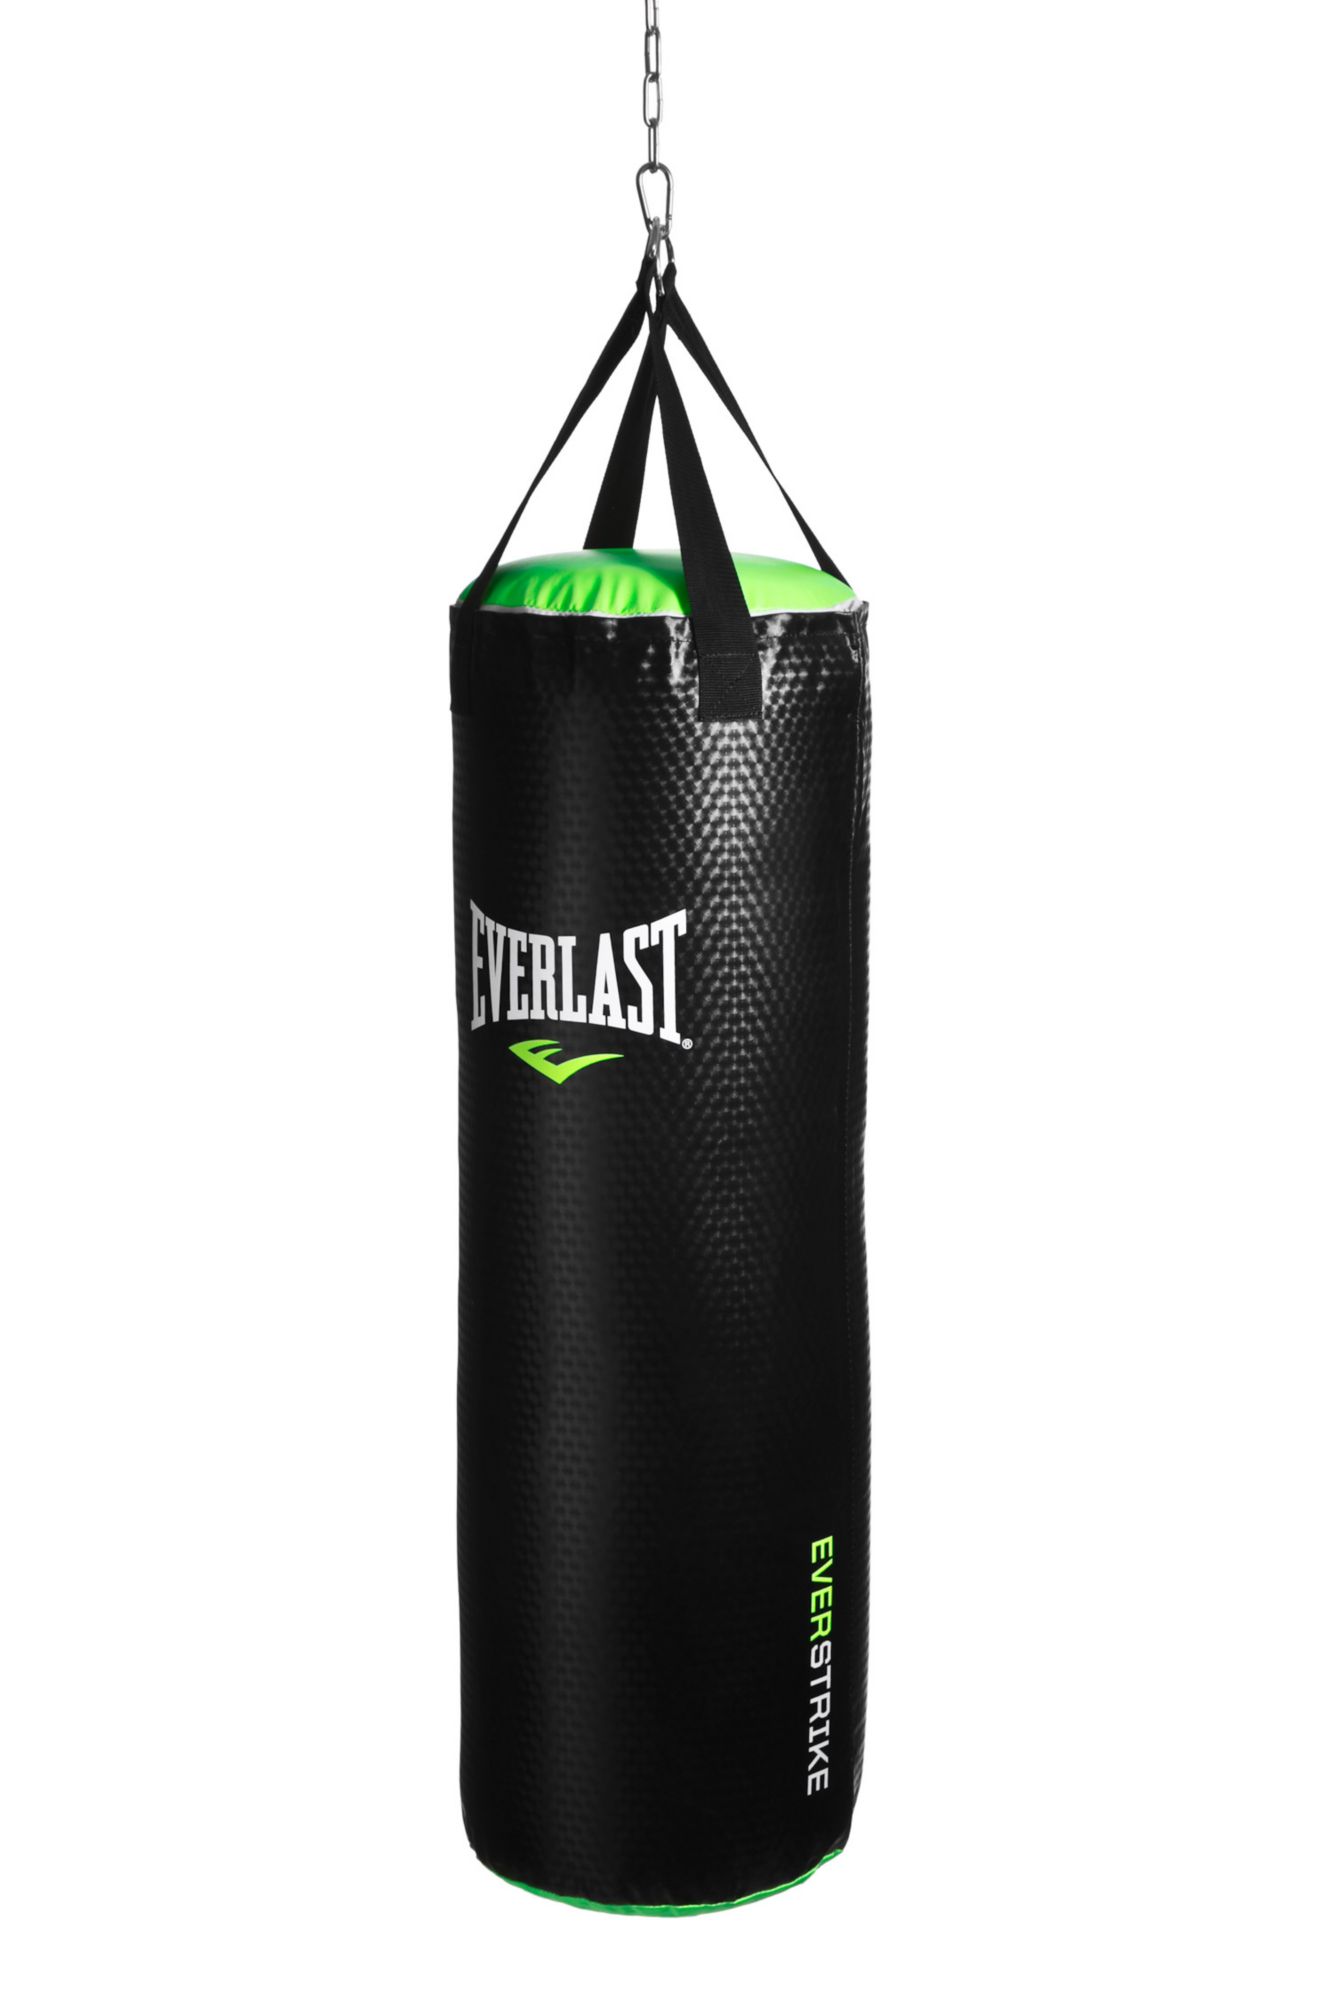 Everlast Punching Bag Workout Routine | EOUA Blog